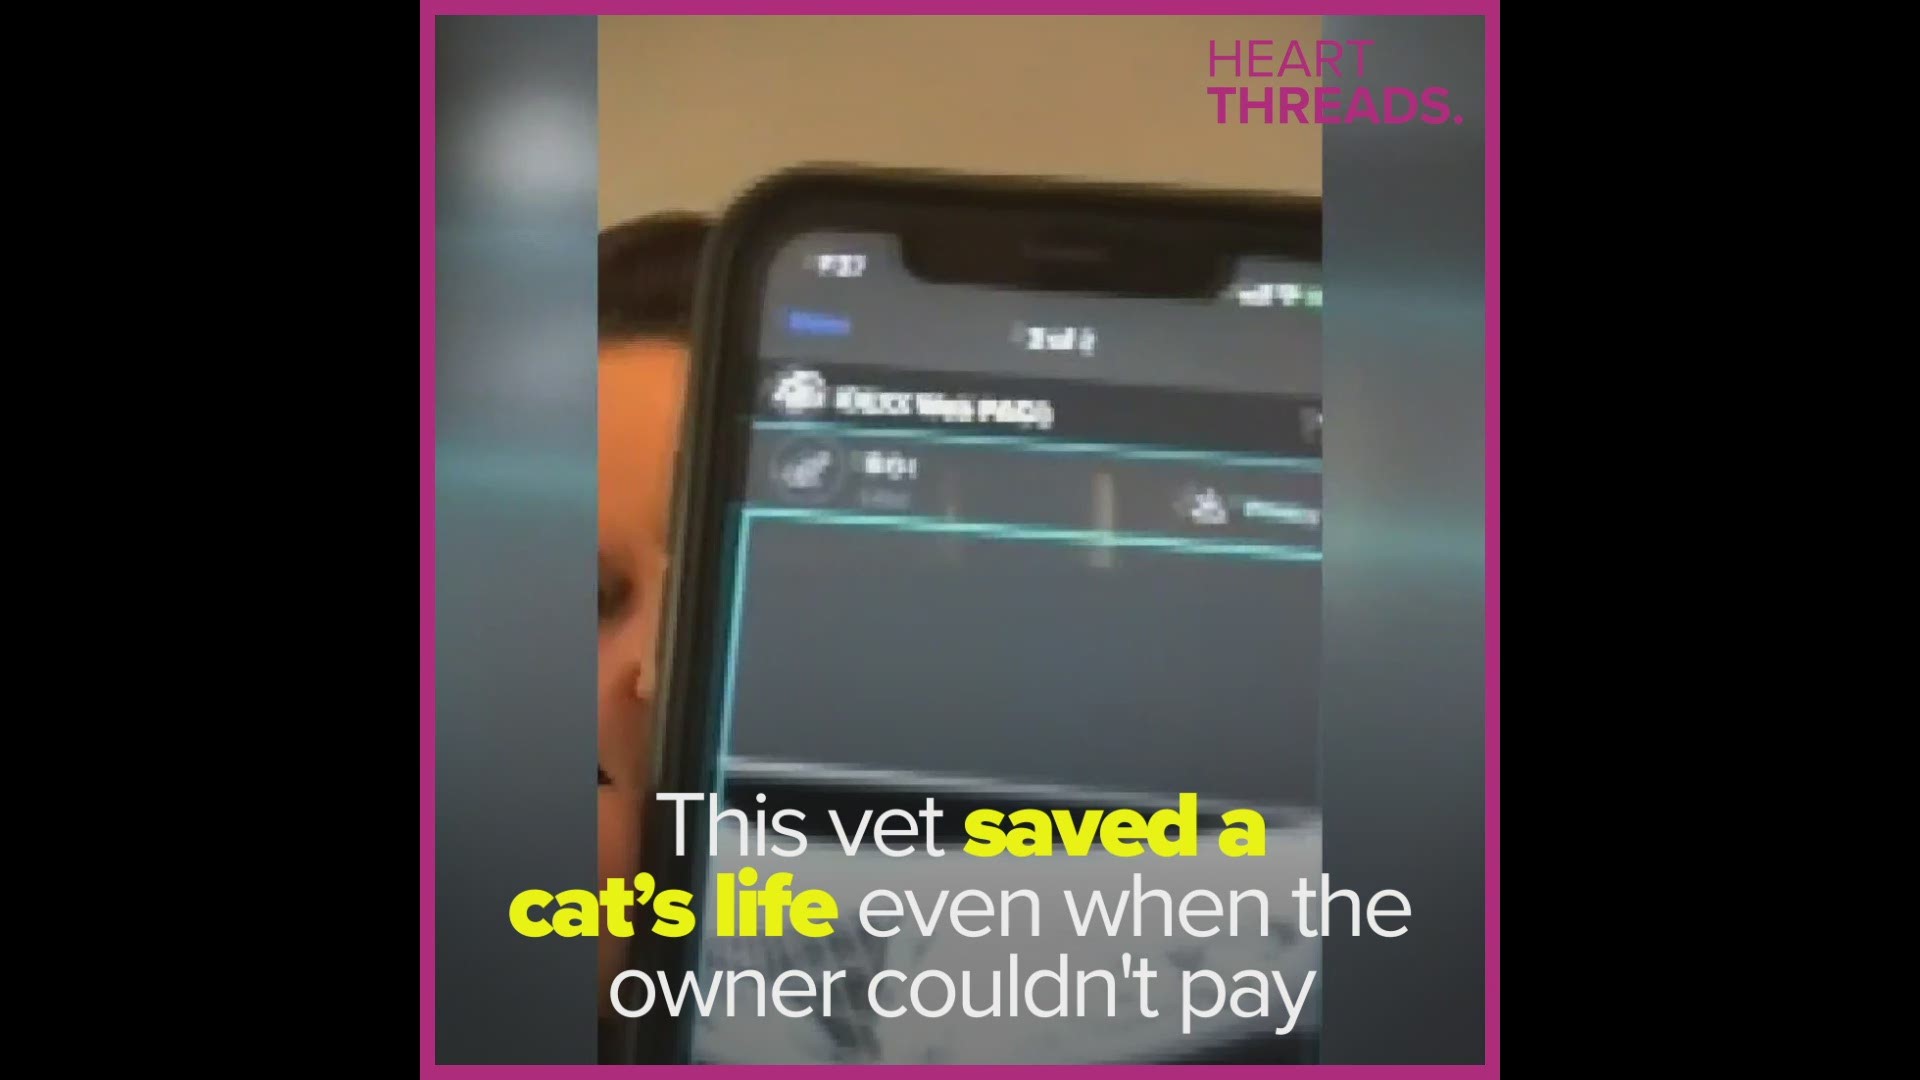 This veterinarian performed a life-saving surgery on a beloved cat, even when the owner couldn't afford to pay.